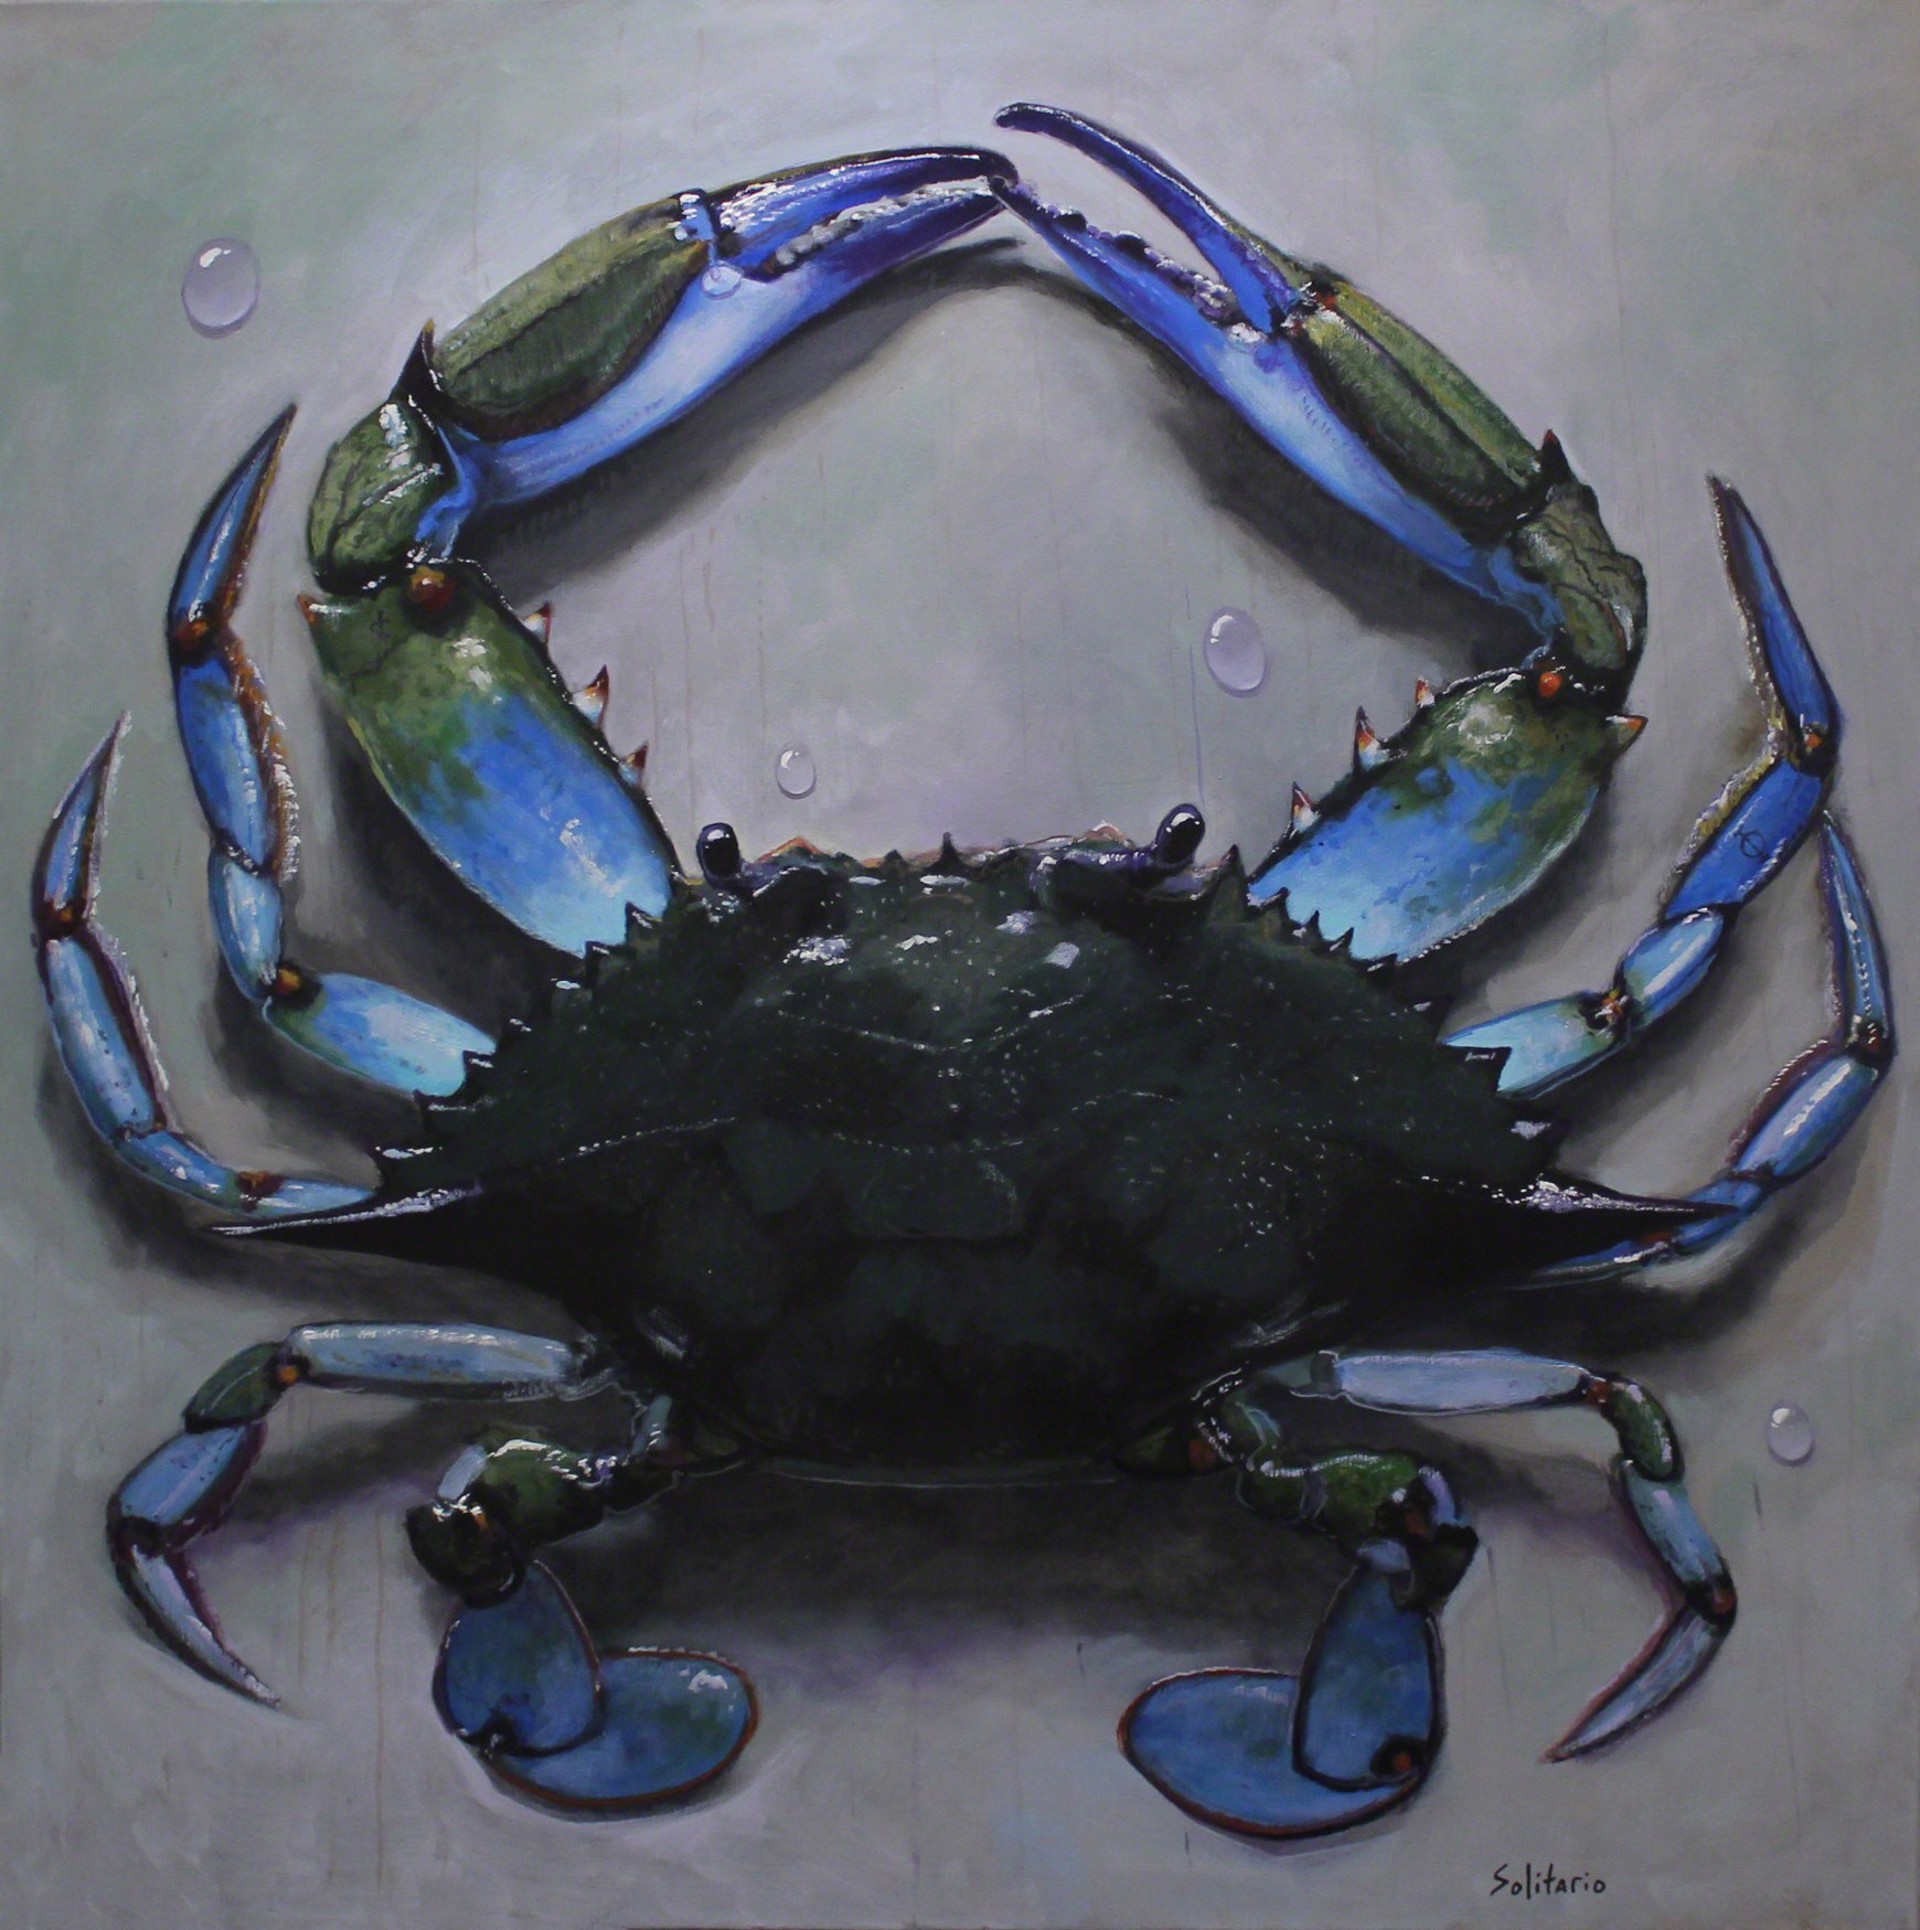 Mr Blue Crab on My Table by Billy Solitario